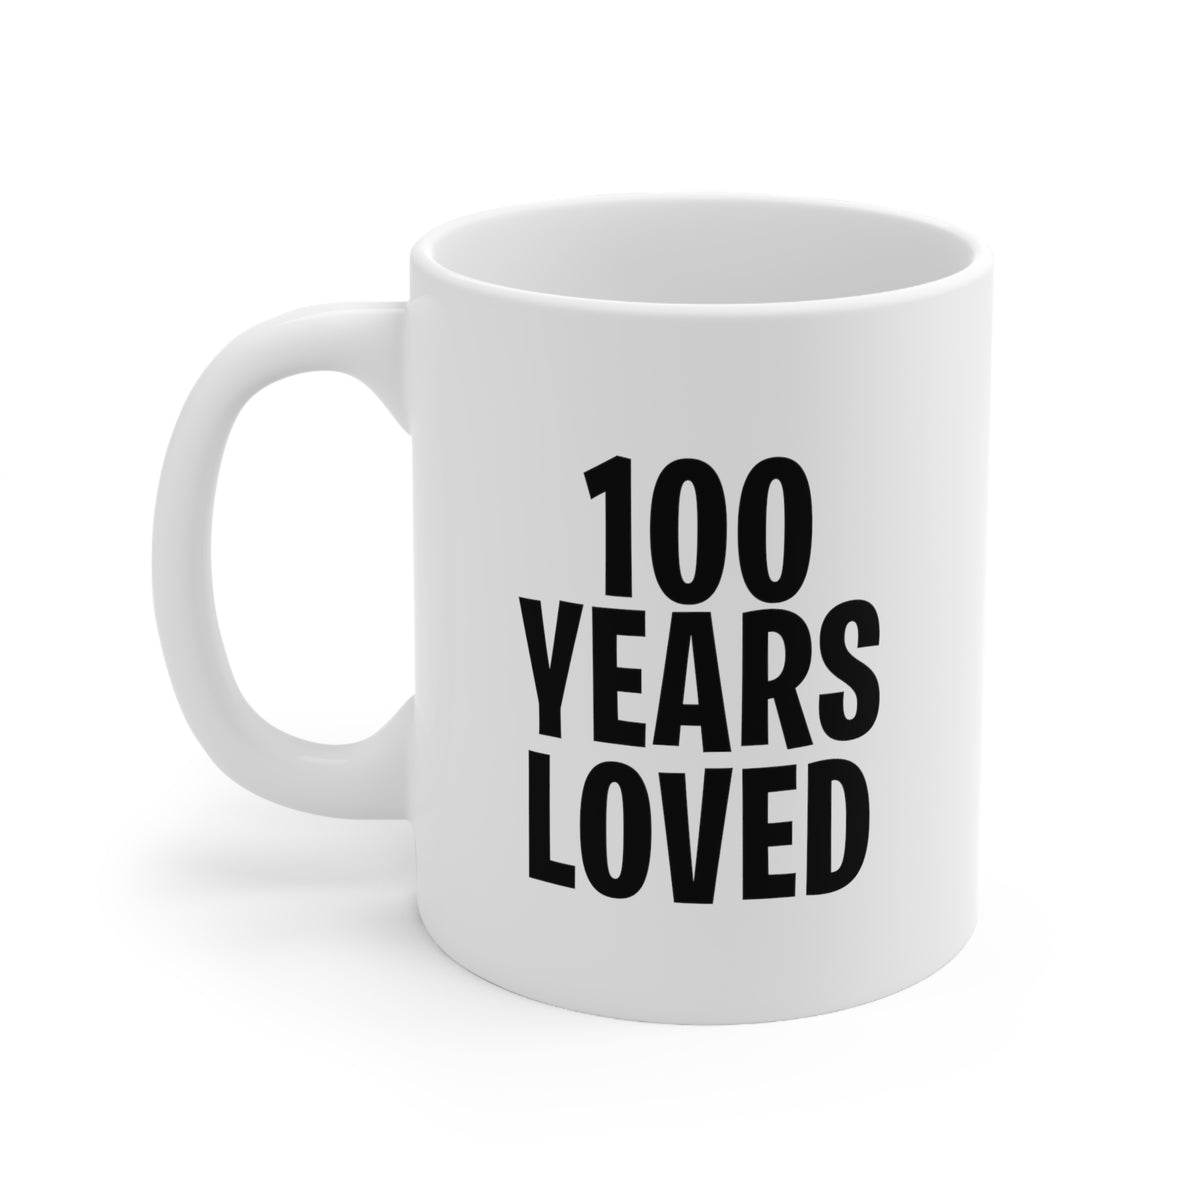 100th Happy Birthday Mug, 100 Years Loved, Unique Birthday For 100 Years Old Dad Mom Brother Sister